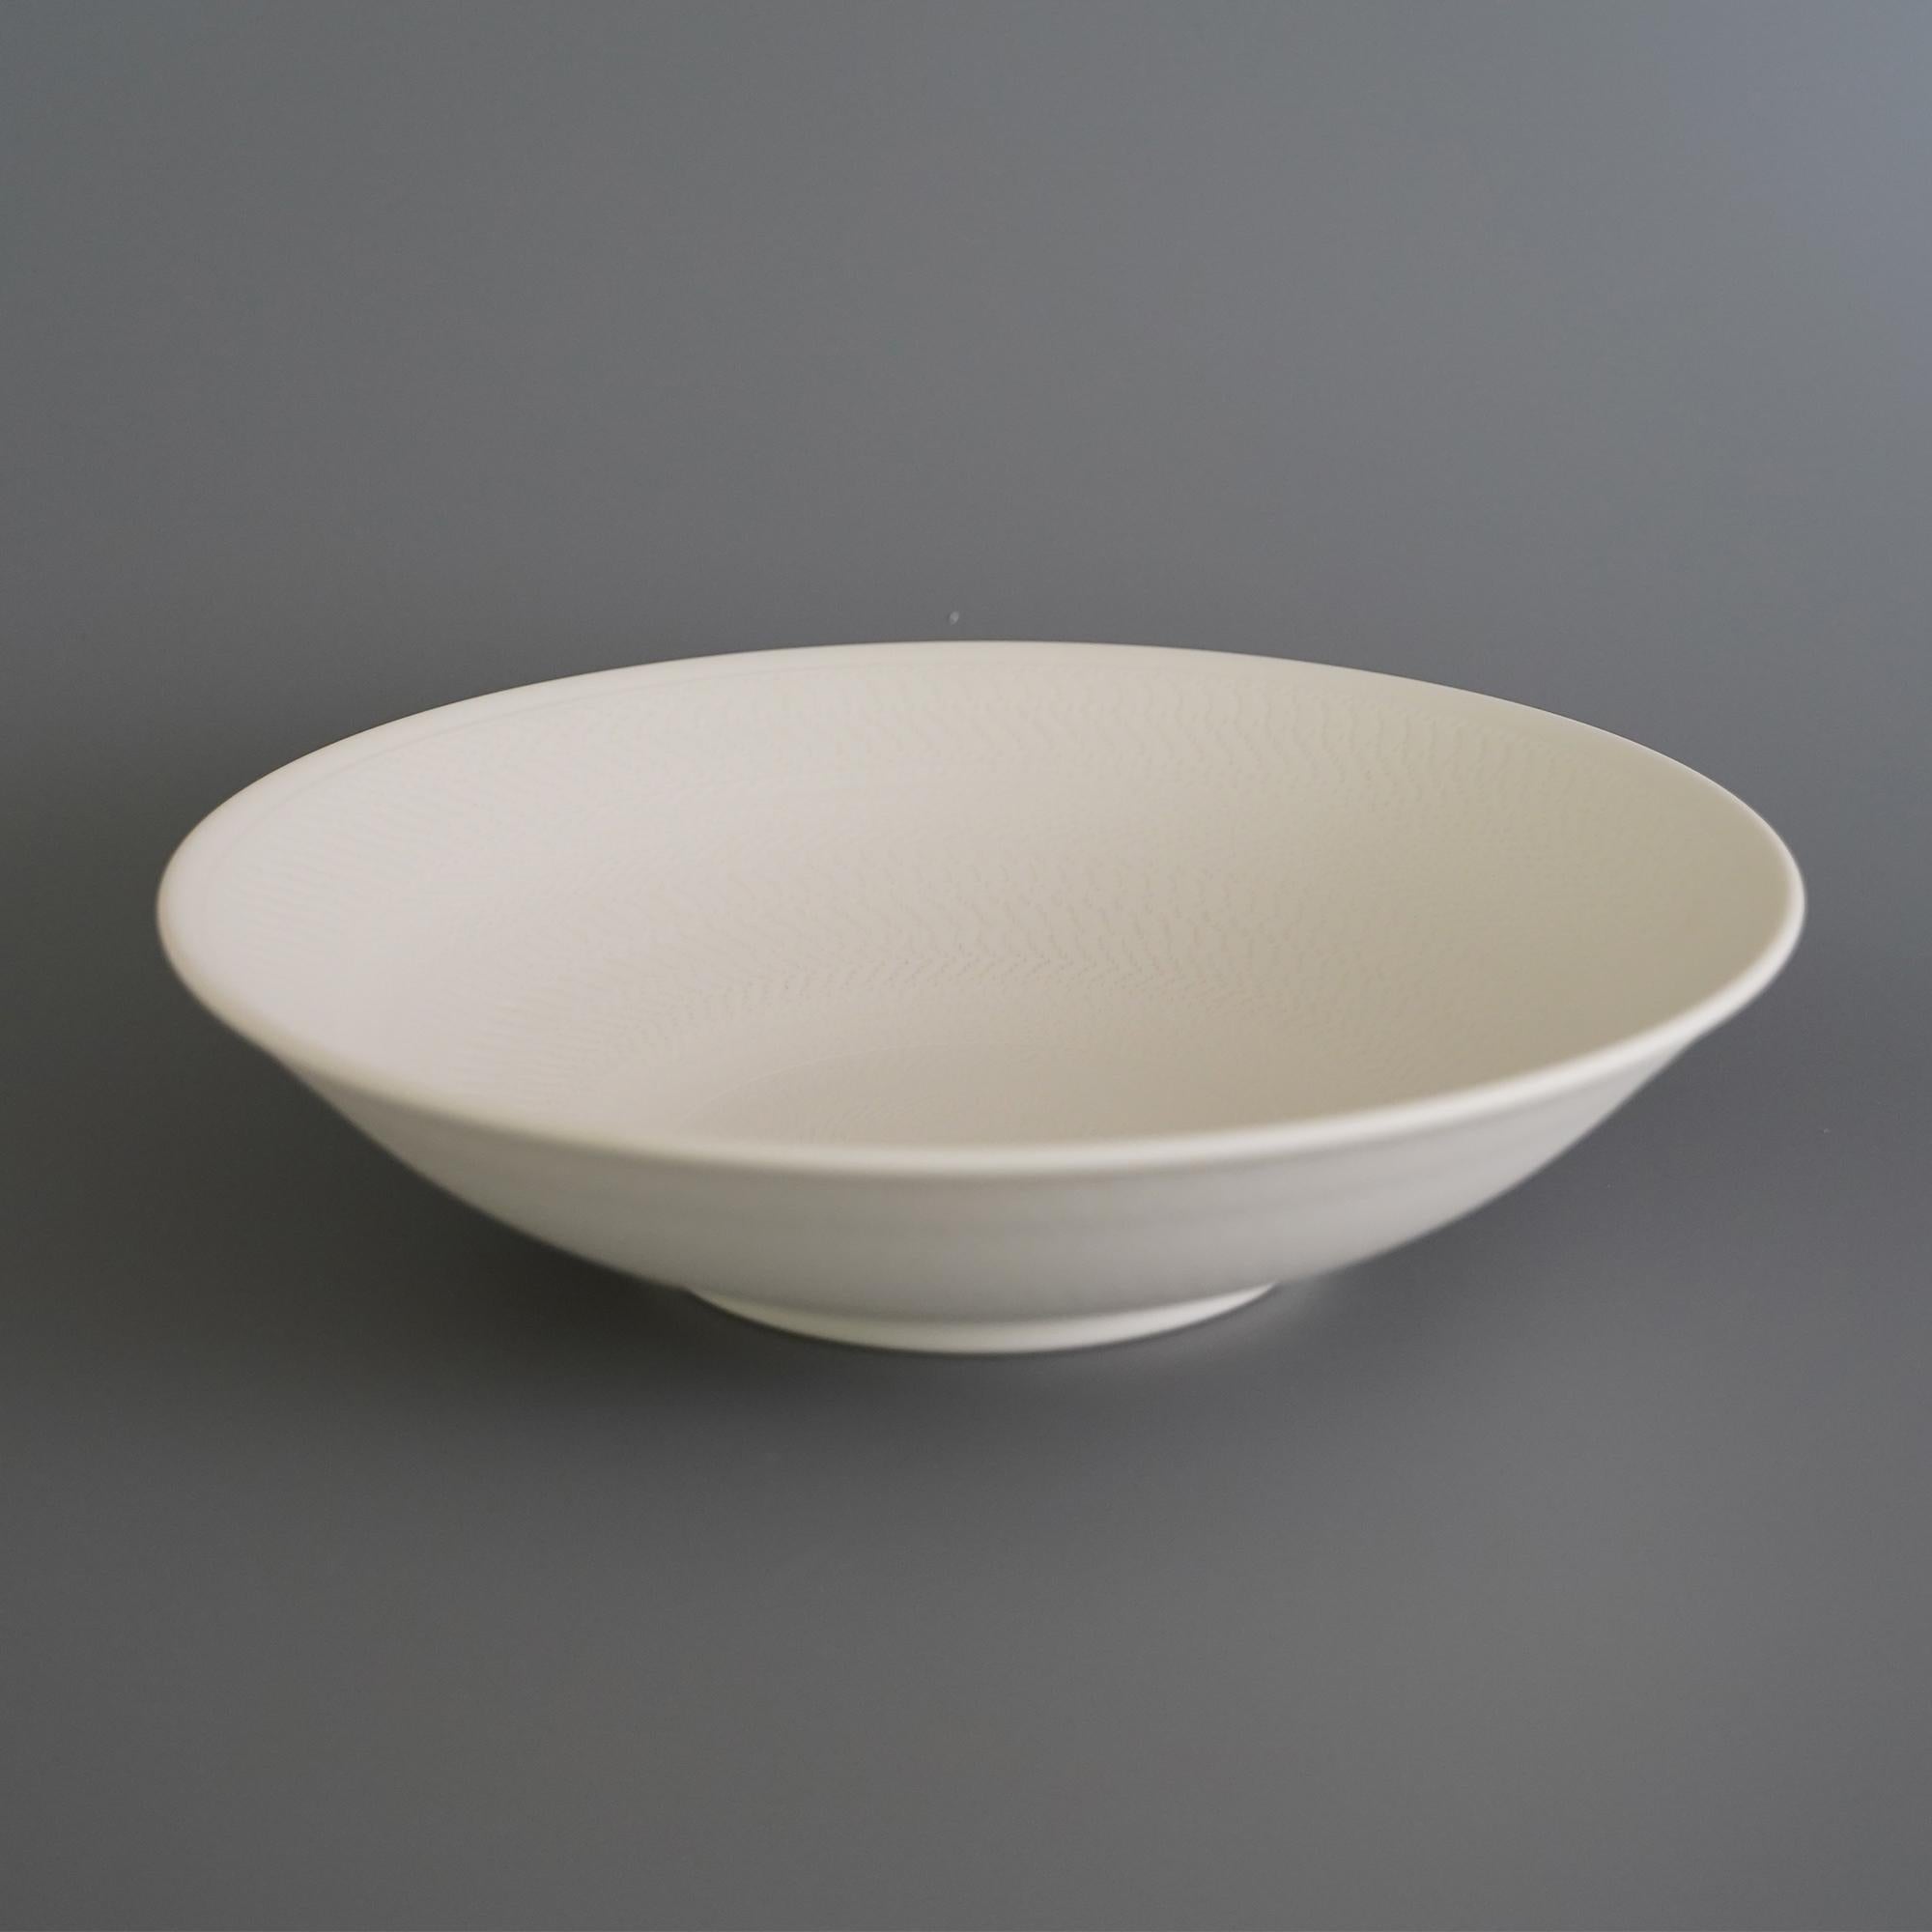 Helice fruit bowl by Studio Cúze.
Dimensions: W 27 x H 6.5 cm.
Materials: ceramic.

The Helice Fruit Bowl is an all-white bowl with a special quality and a unique handmade pattern. The bowl offers an even and precise shape, which is perfectly